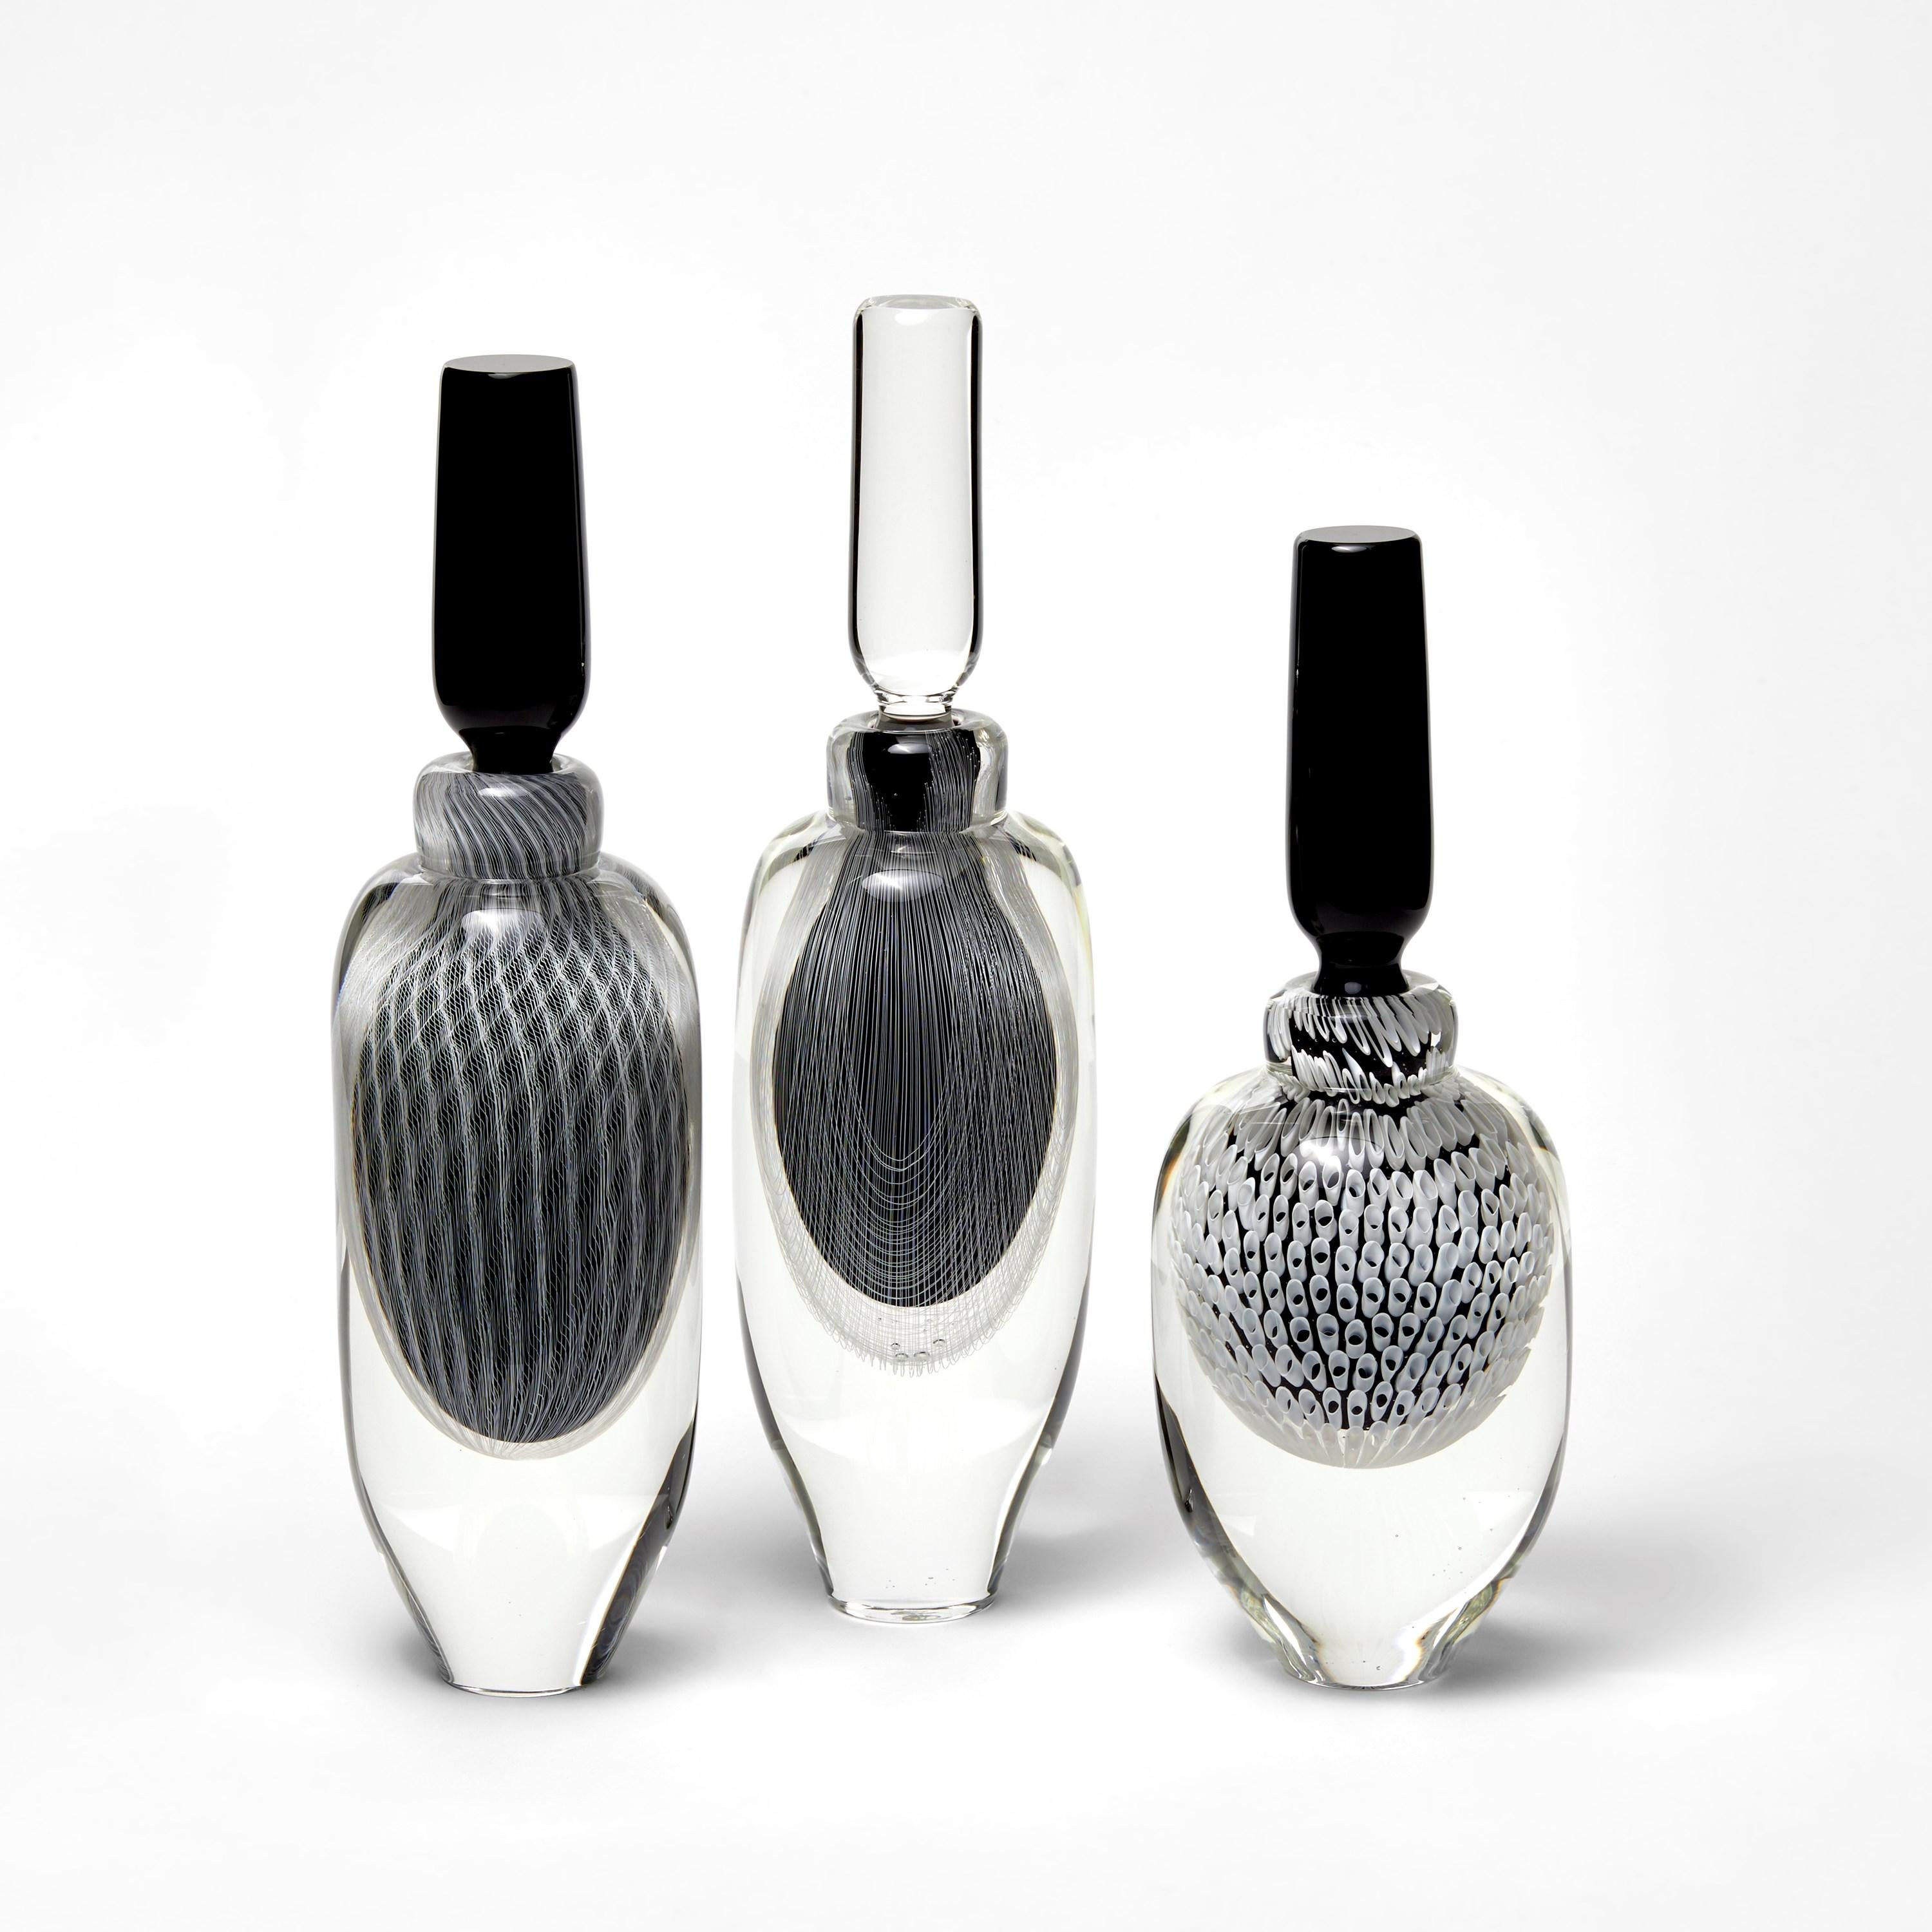 Hand-Crafted Woven Threads, a Monochrome Large Sculptural Glass Bottle by Peter Bowles